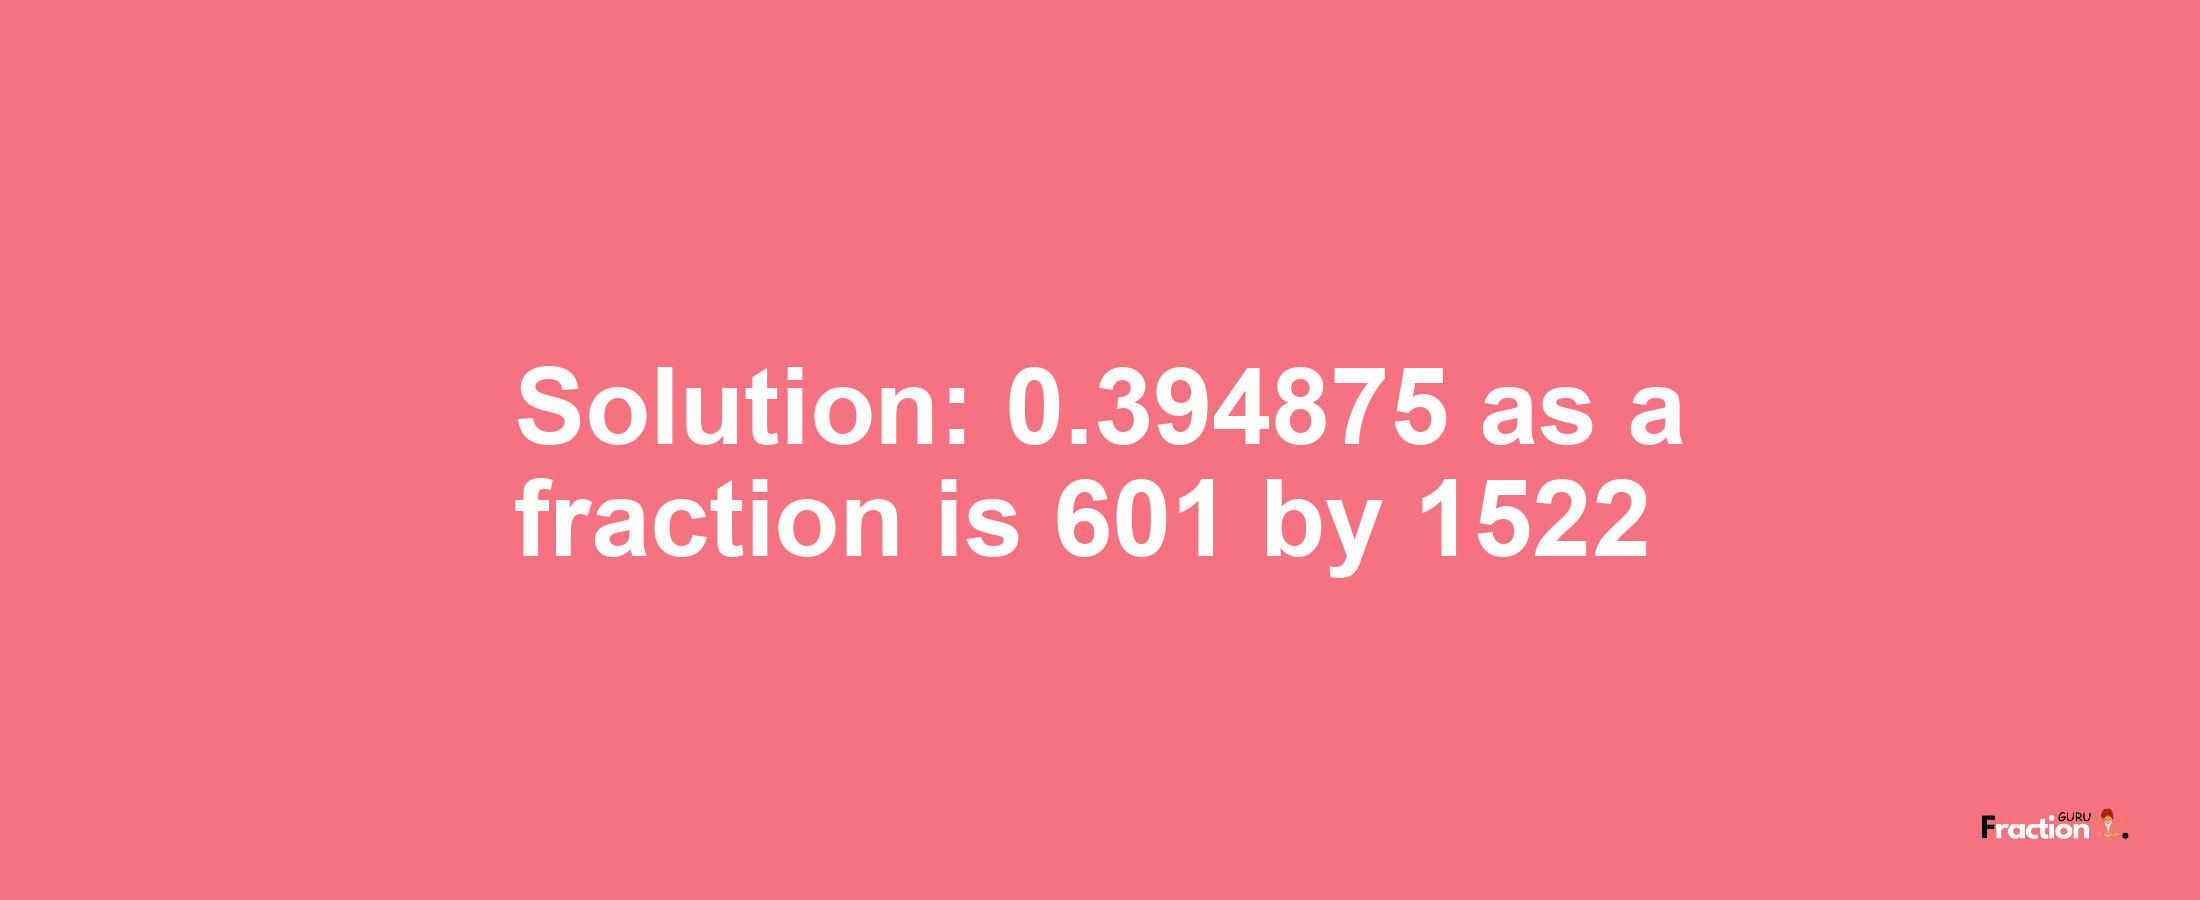 Solution:0.394875 as a fraction is 601/1522